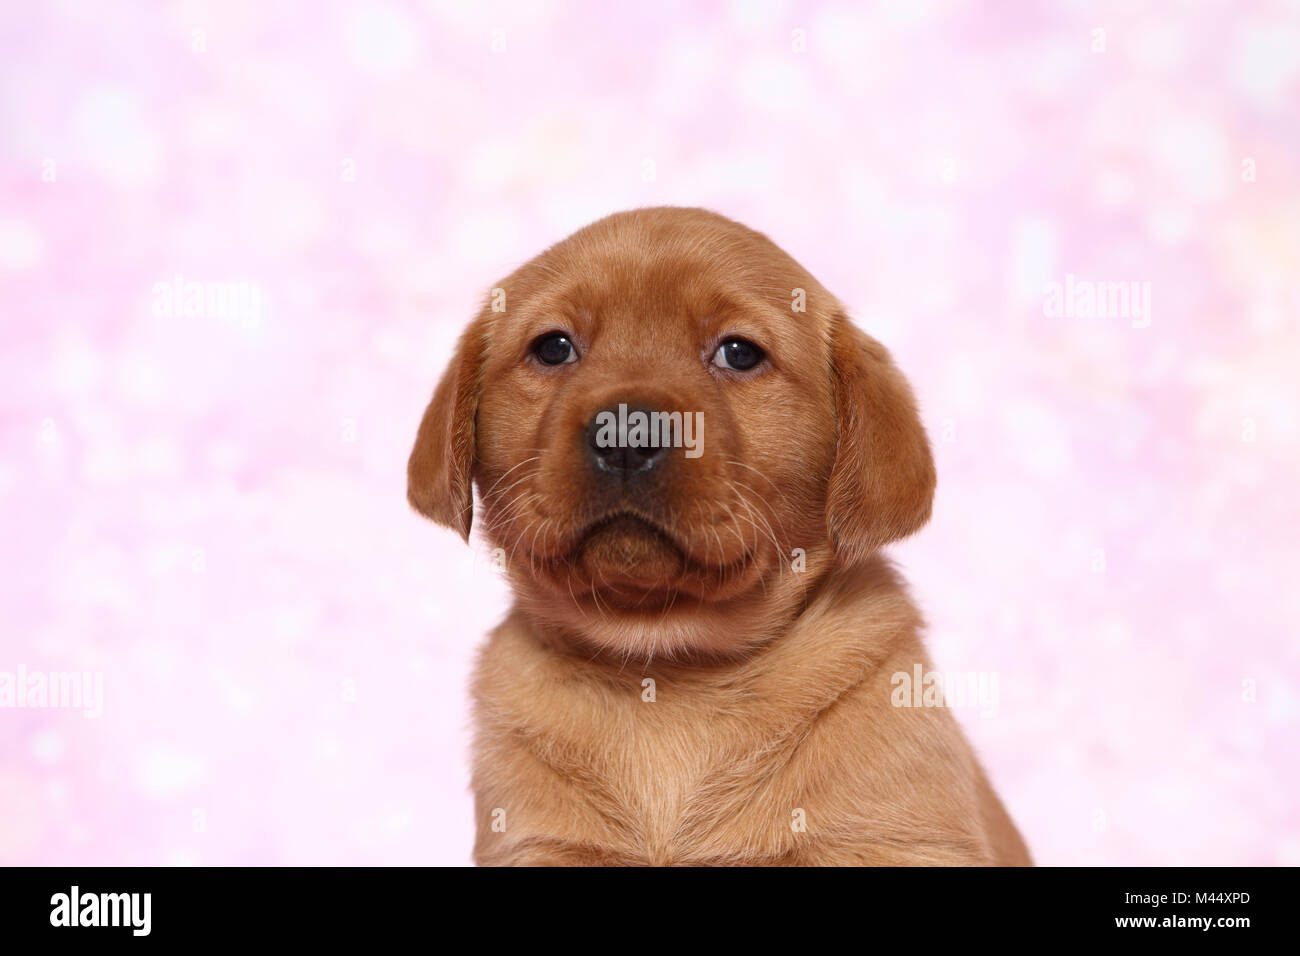 Labrador Retriever. Portrait of a puppy (6 weeks old). Studio picture seen against a pink background. Germany Stock Photo